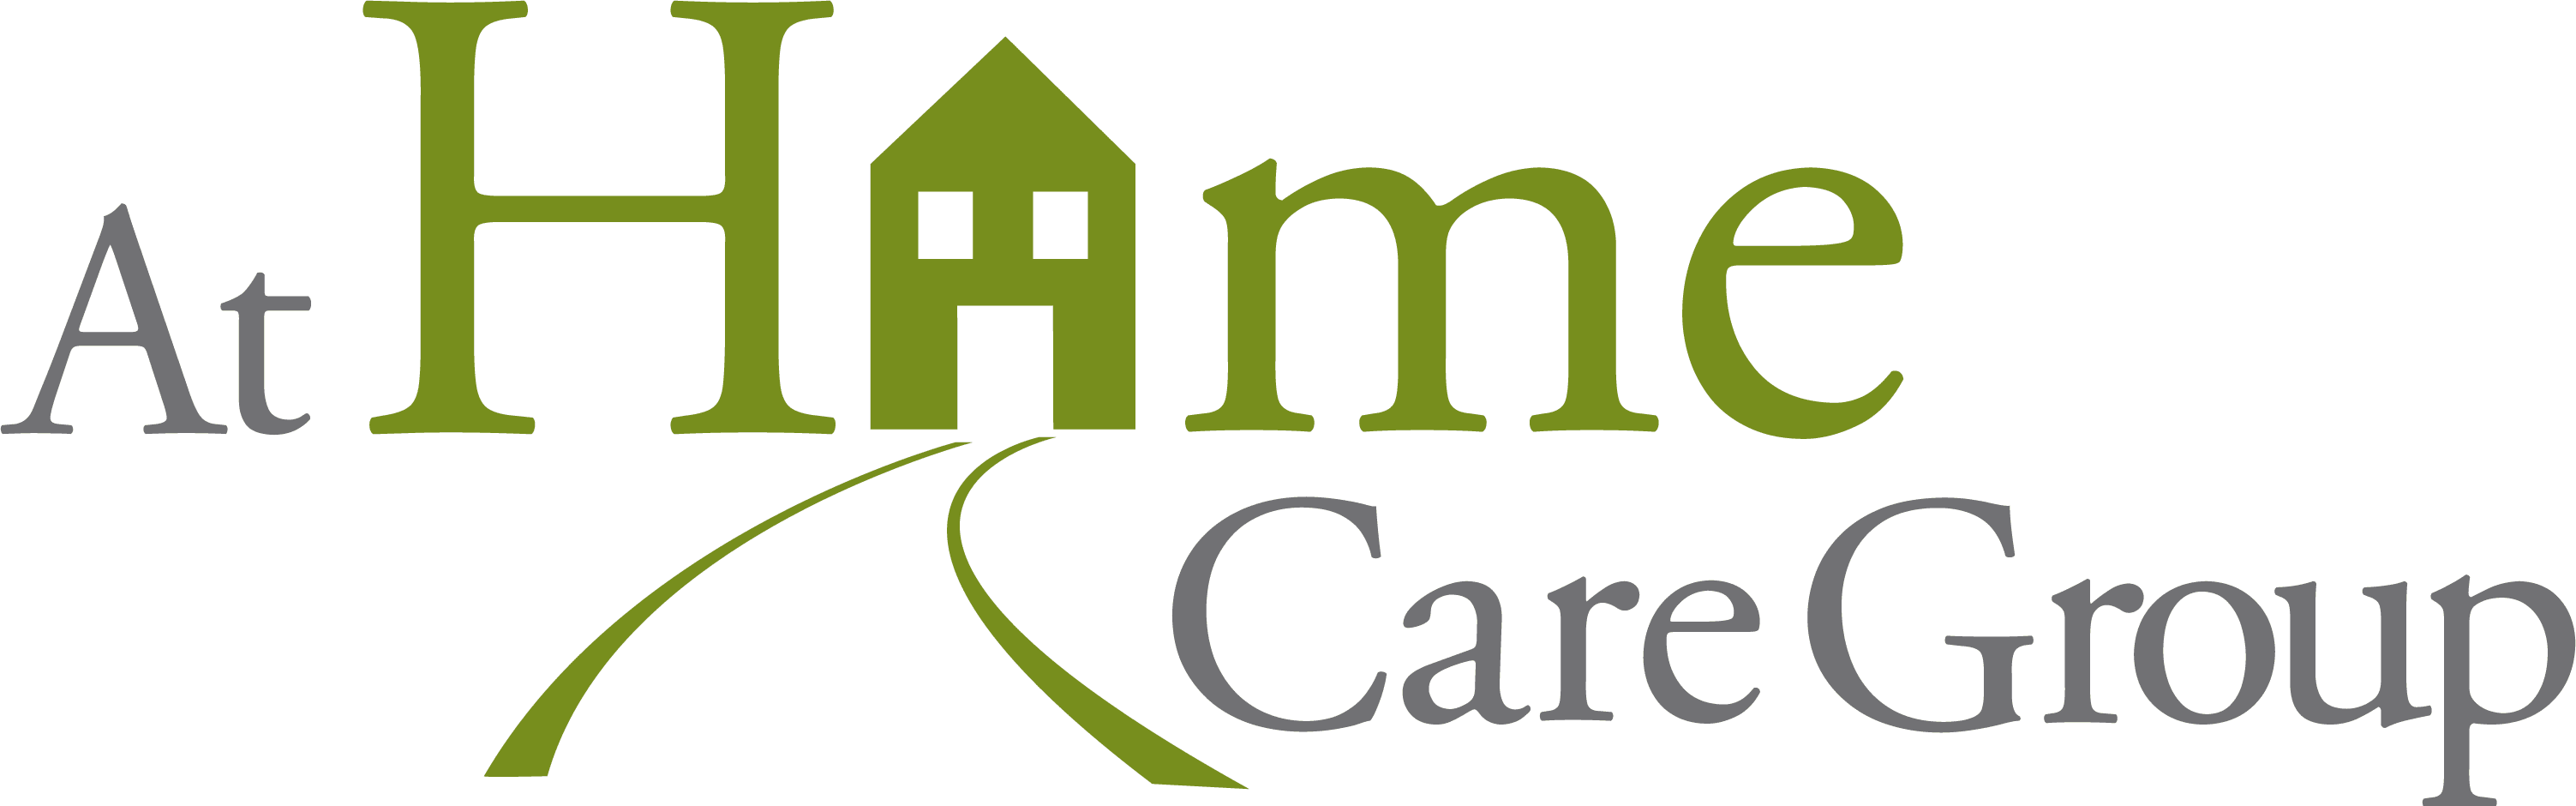 At Home Care Group - Home Care Group Logo (3006x940)